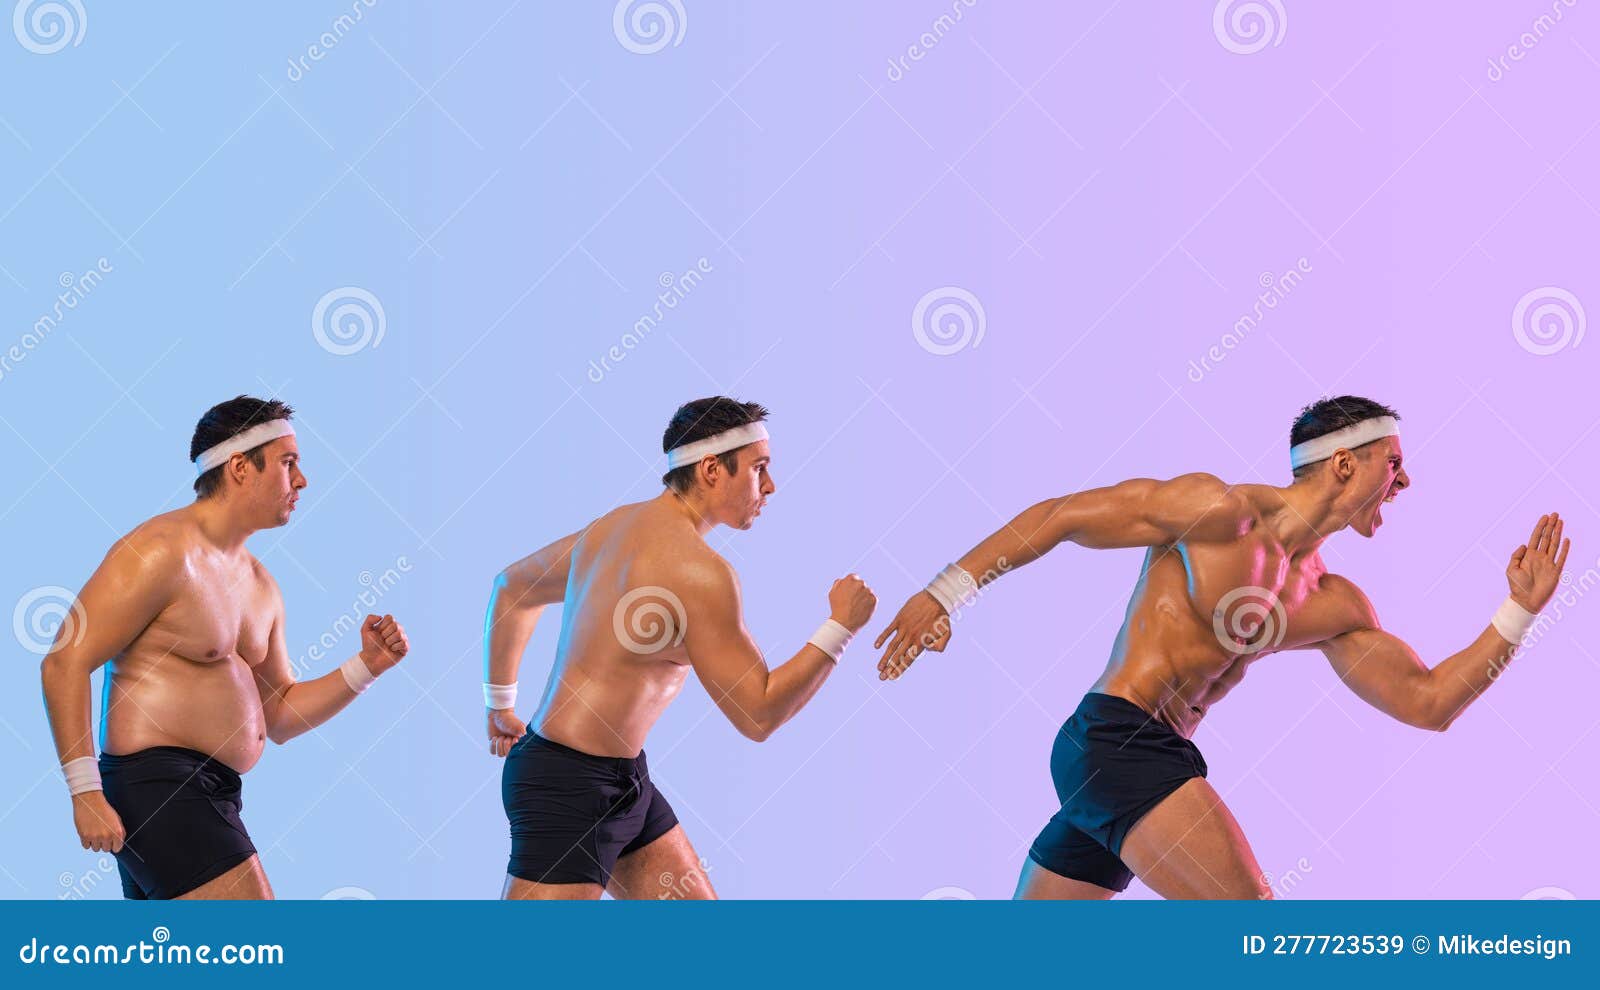 Before and after Weight Loss Fitness Transformation. Fat Man Jogging To Lose  Weight and Become a Slim Athlete. Running Stock Image - Image of people,  fitness: 277723539